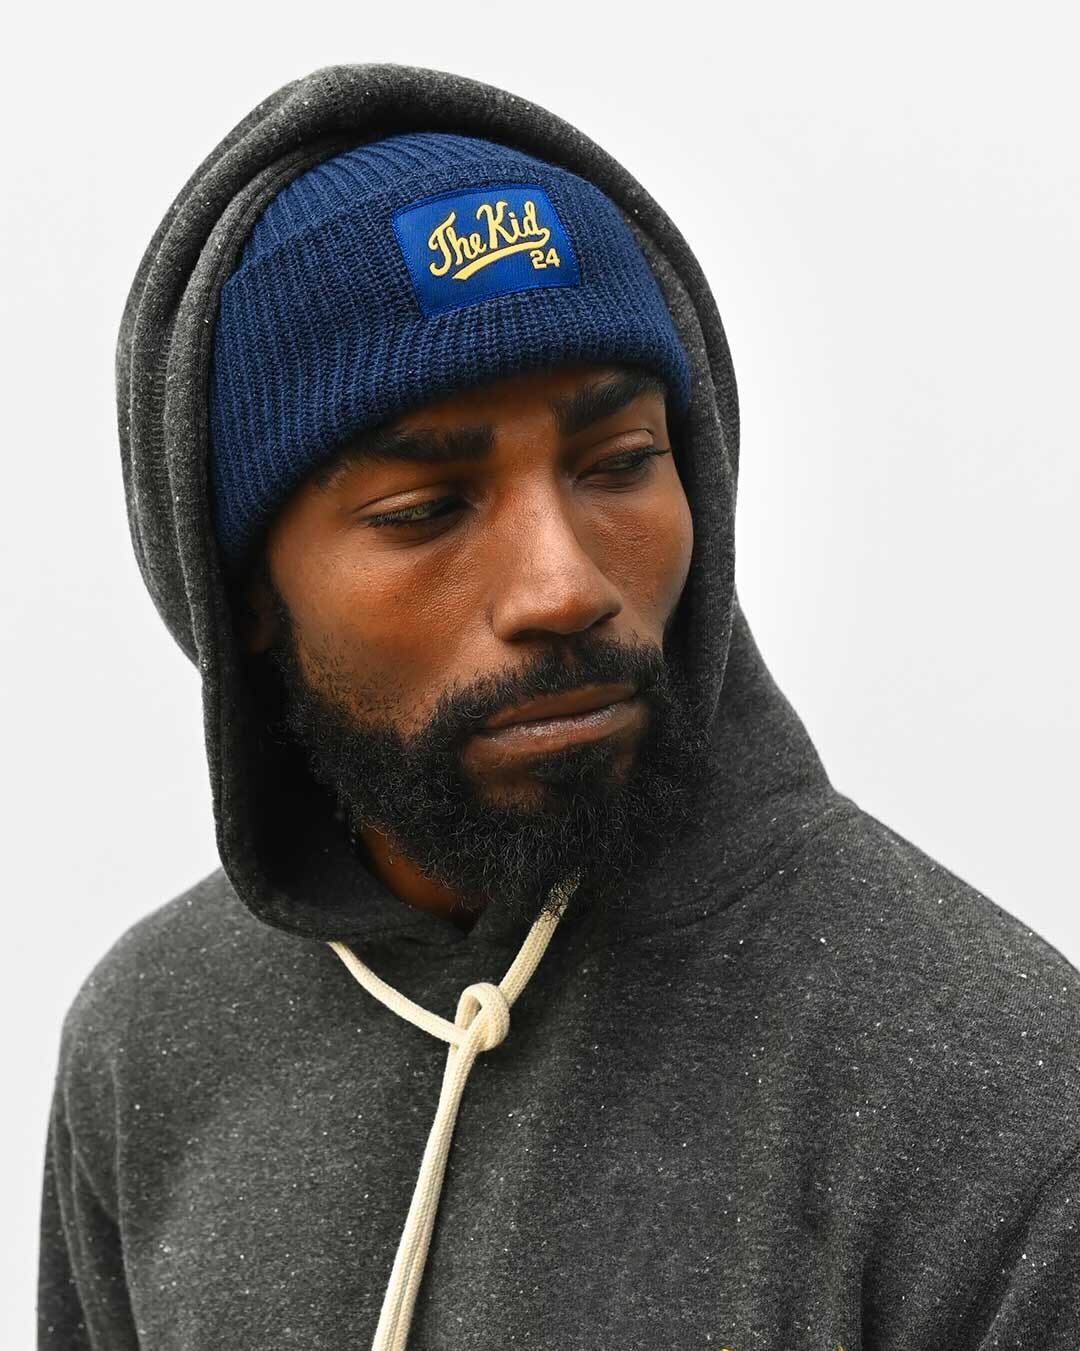 Ken Griffey Jr. &quot;The Kid&quot; Navy Beanie - Roots of Fight Canada